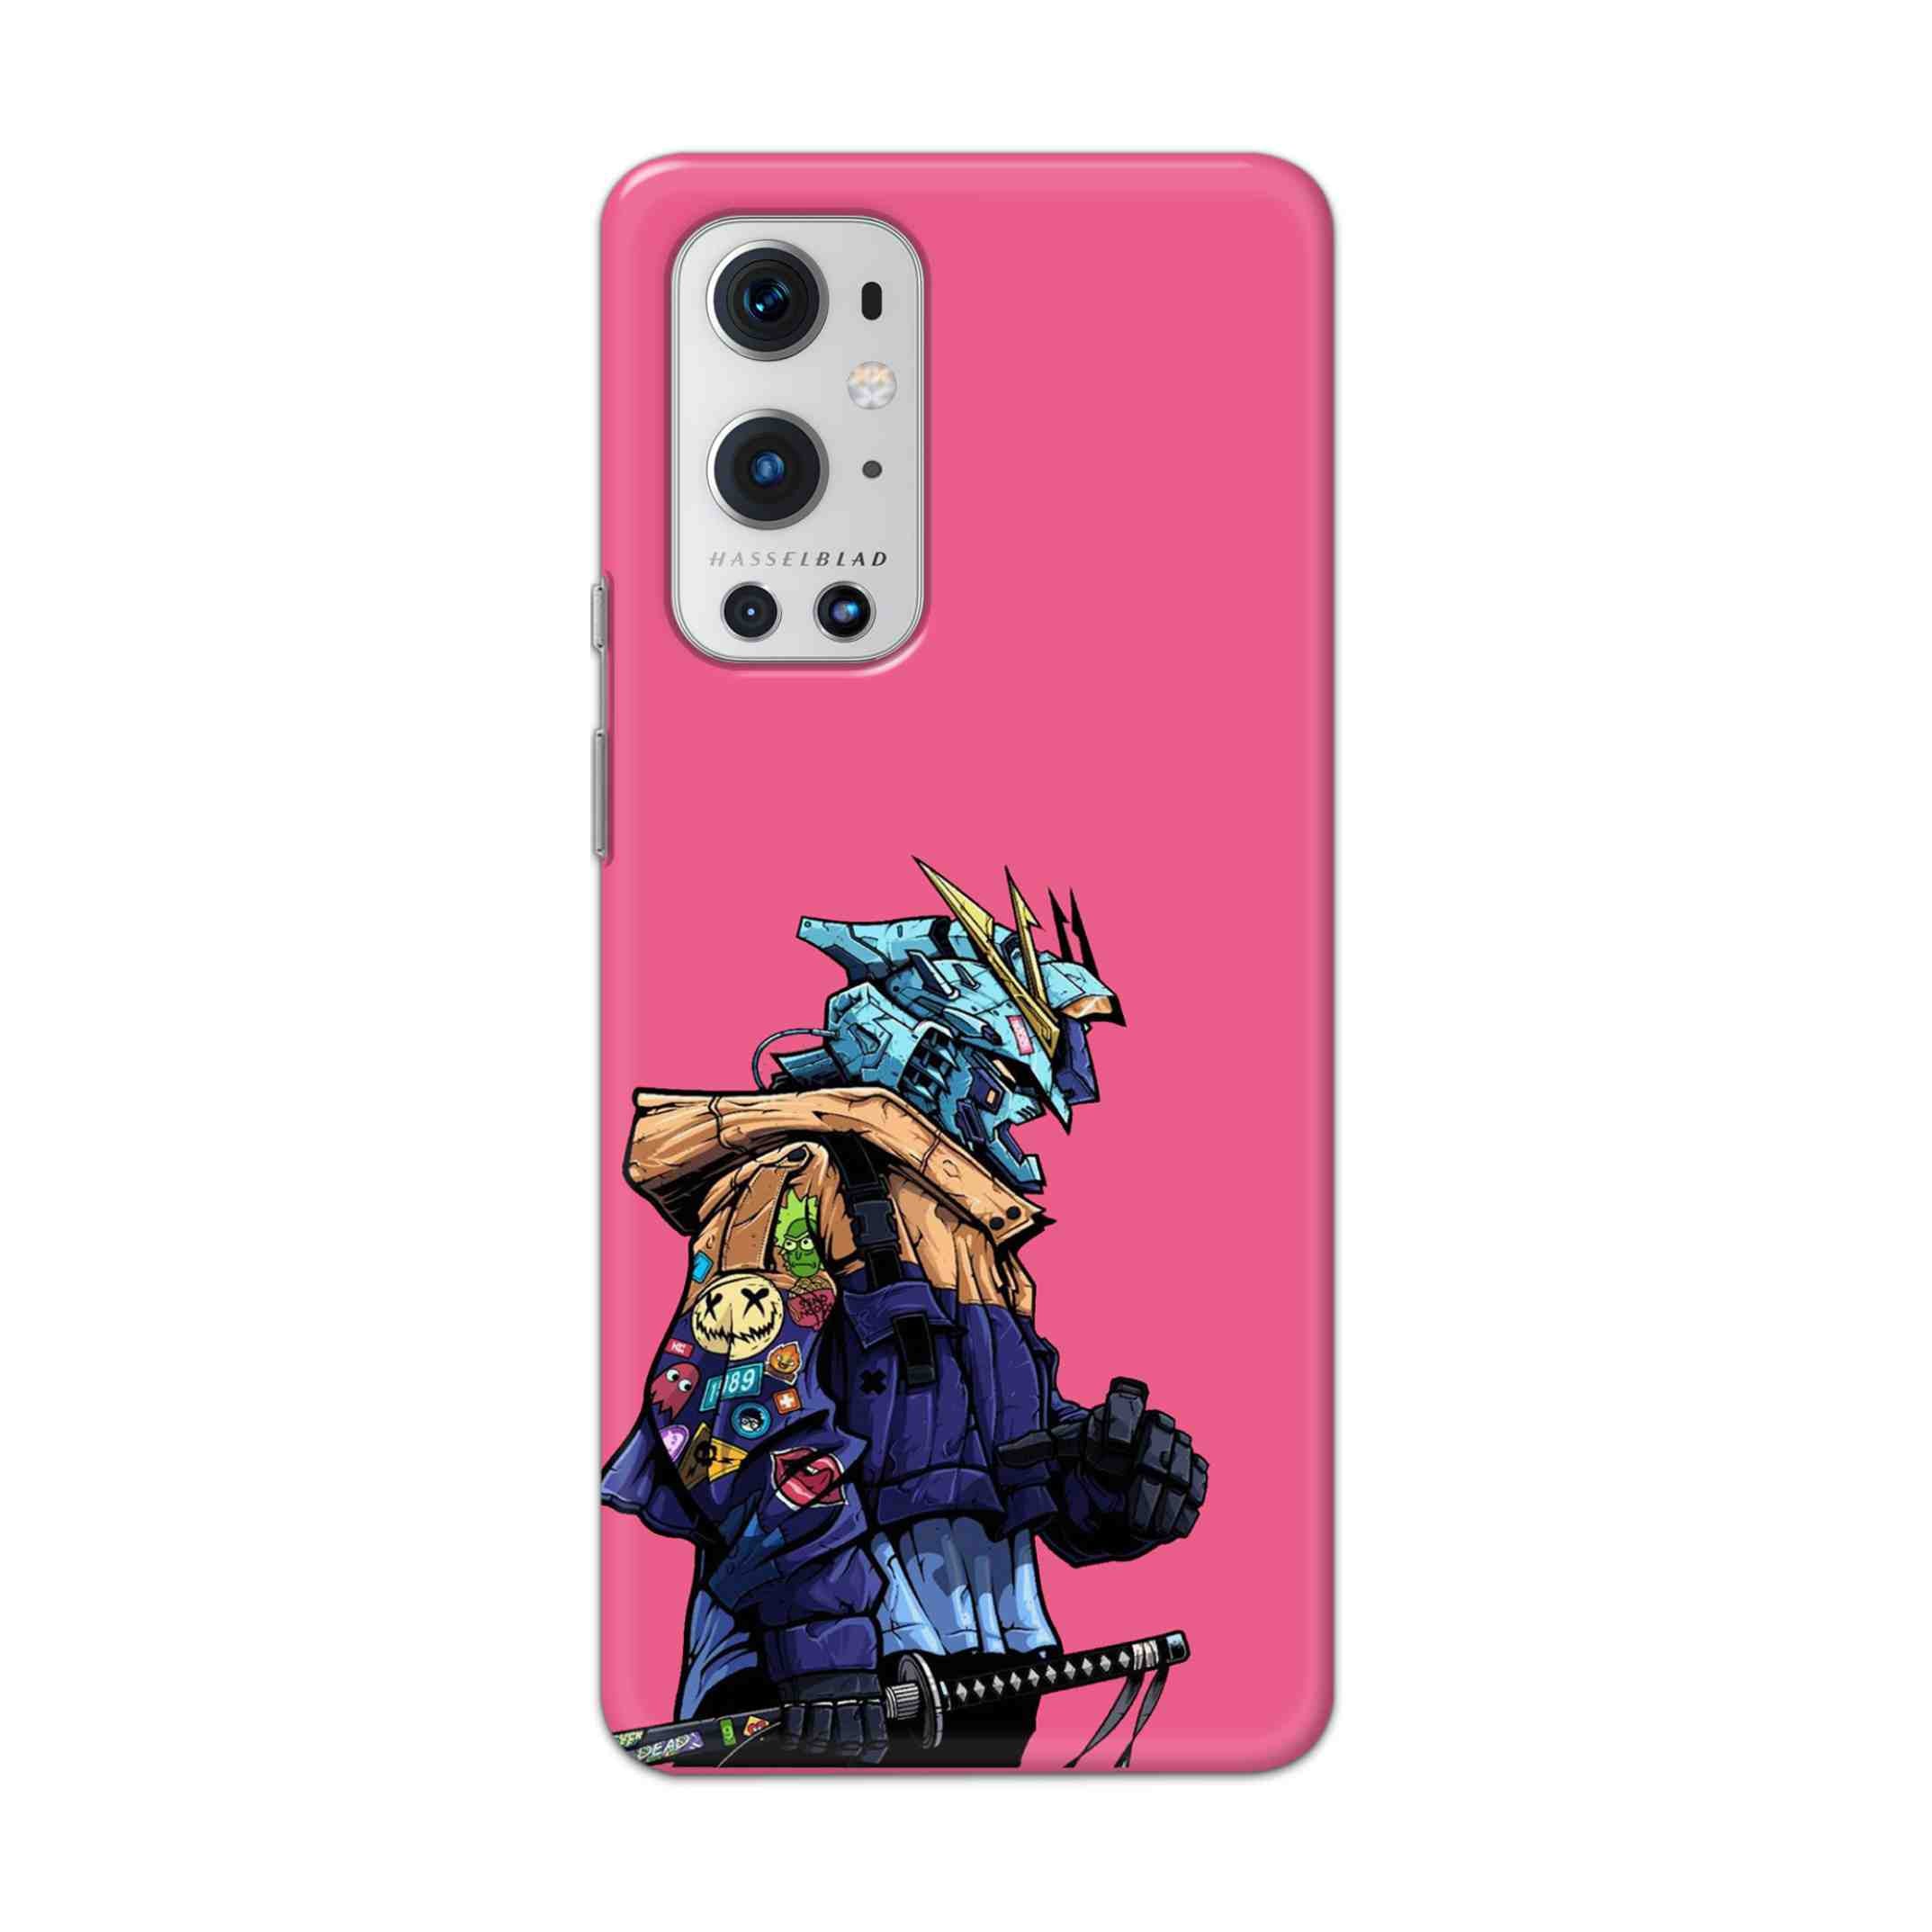 Buy Sword Man Hard Back Mobile Phone Case Cover For OnePlus 9 Pro Online